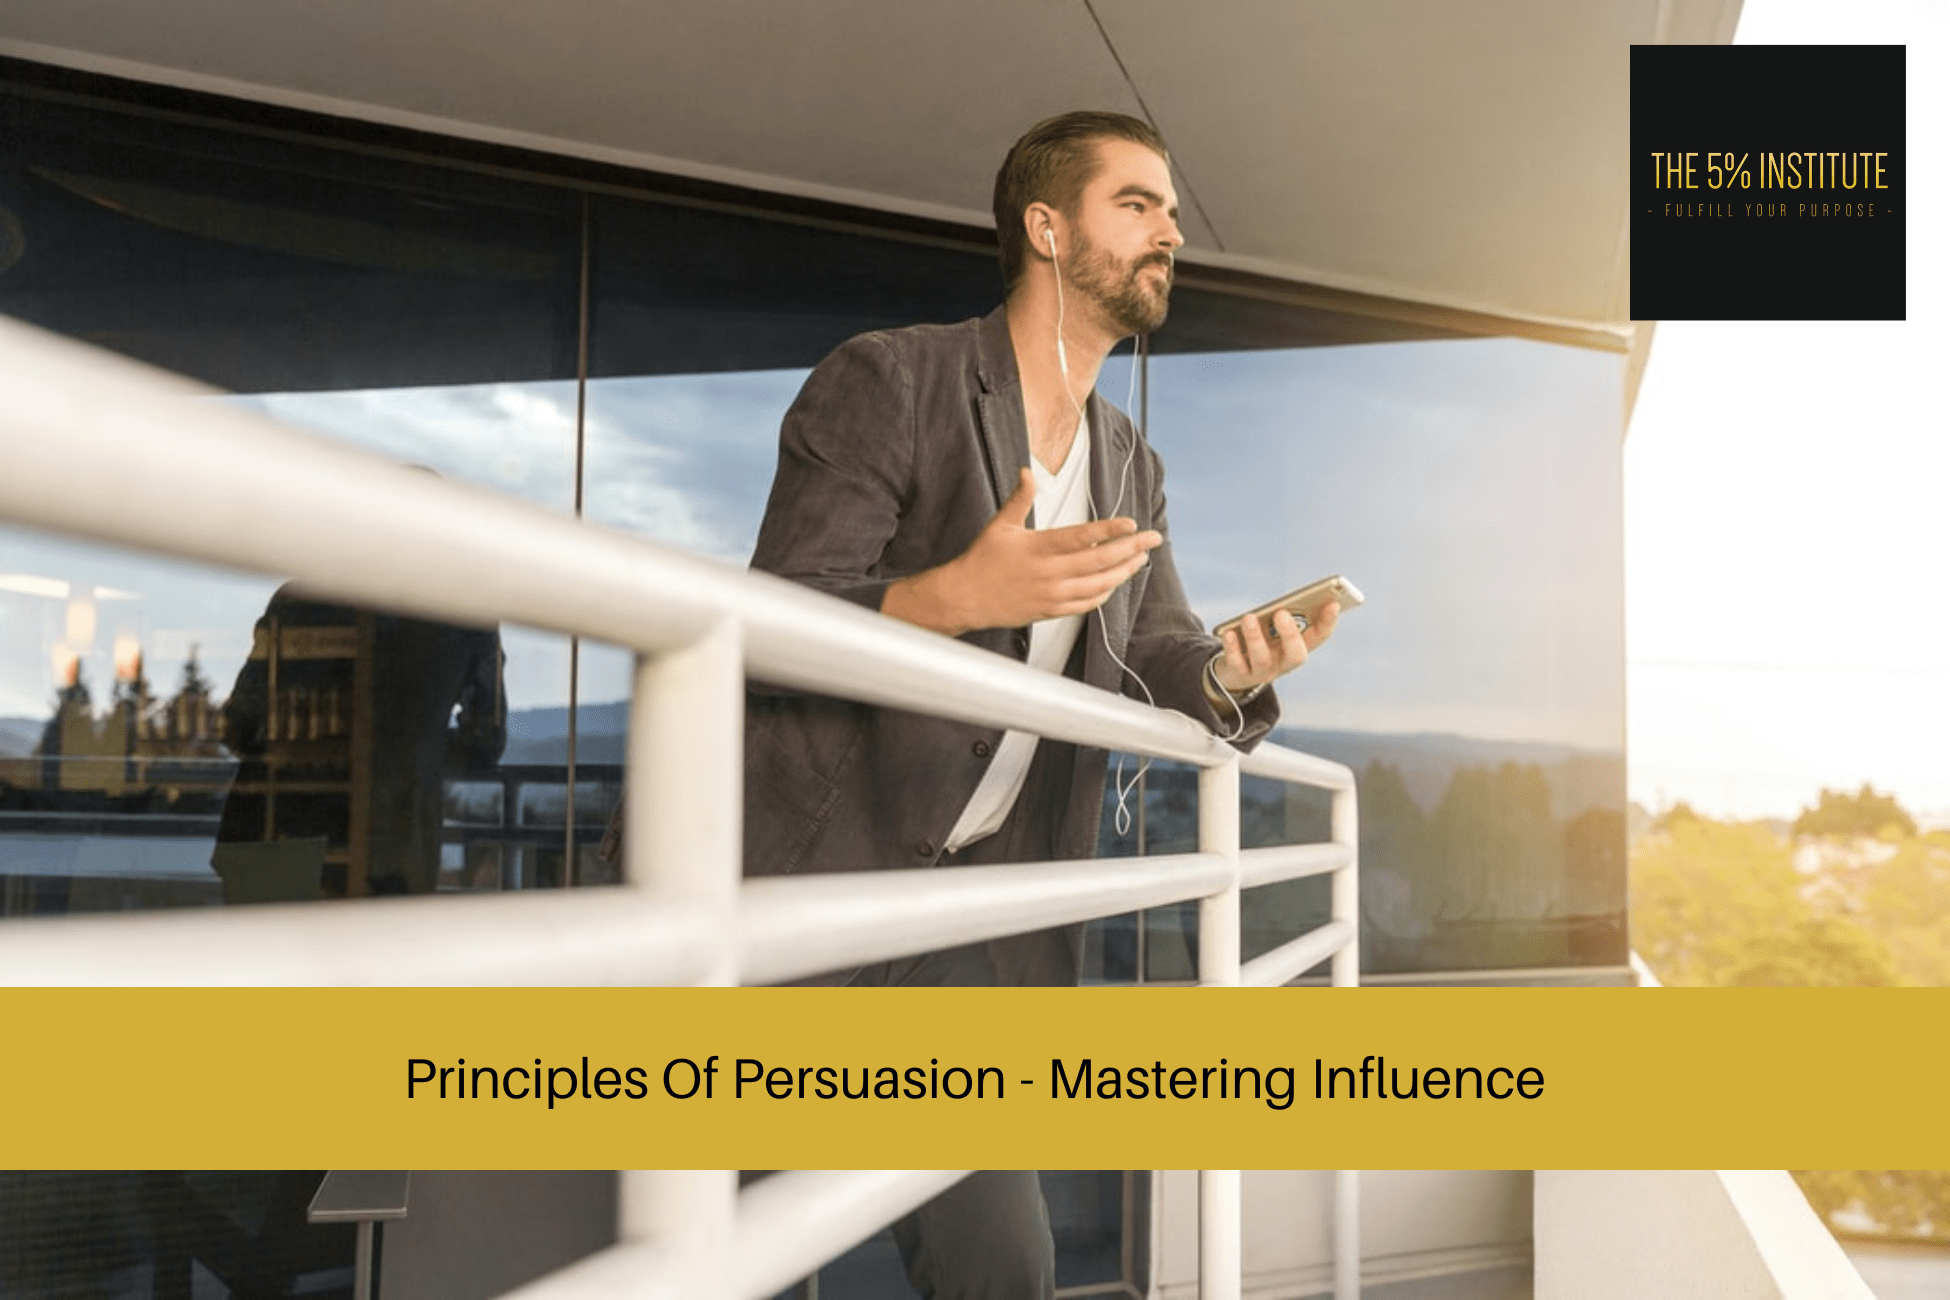 Principles Of Persuasion - Mastering Influence